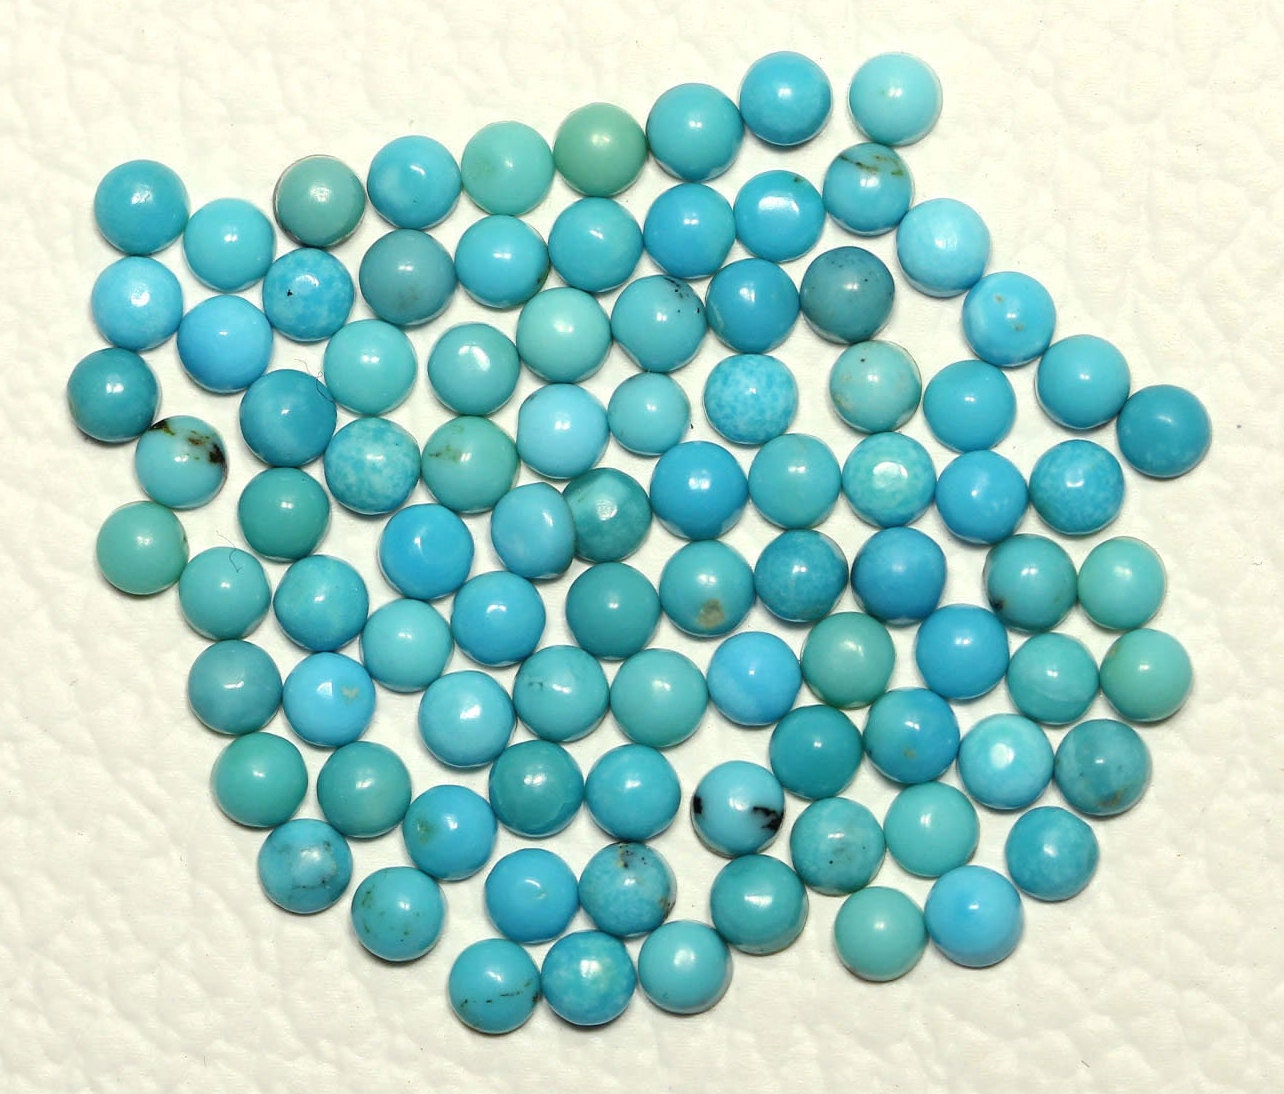 3mm  Round Cabochon Loose Gemstones Lot 25 Sleeping Beauty Turquoise 2.5mm 